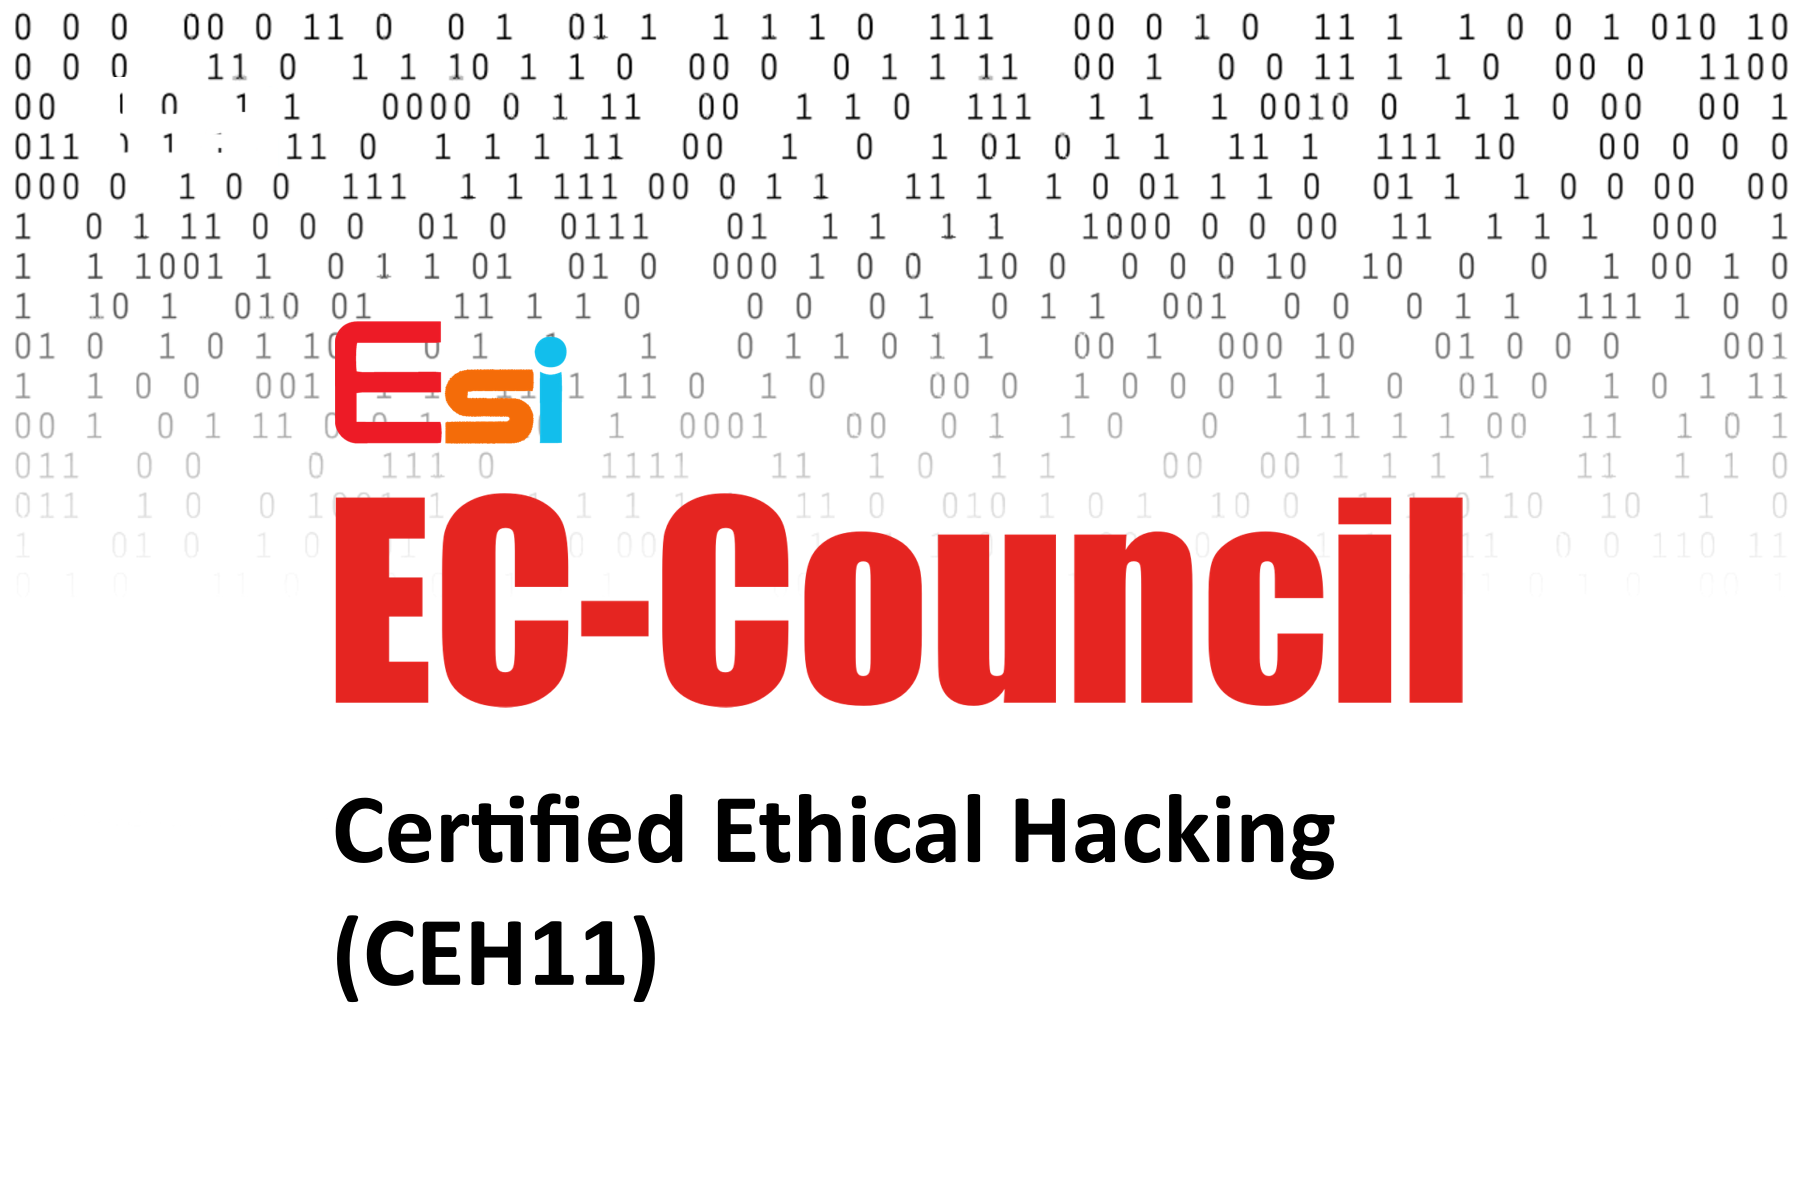 EC-Council Certified Ethical Hacking (CEH11) Course - Engineering Science  Institute for Training & Development